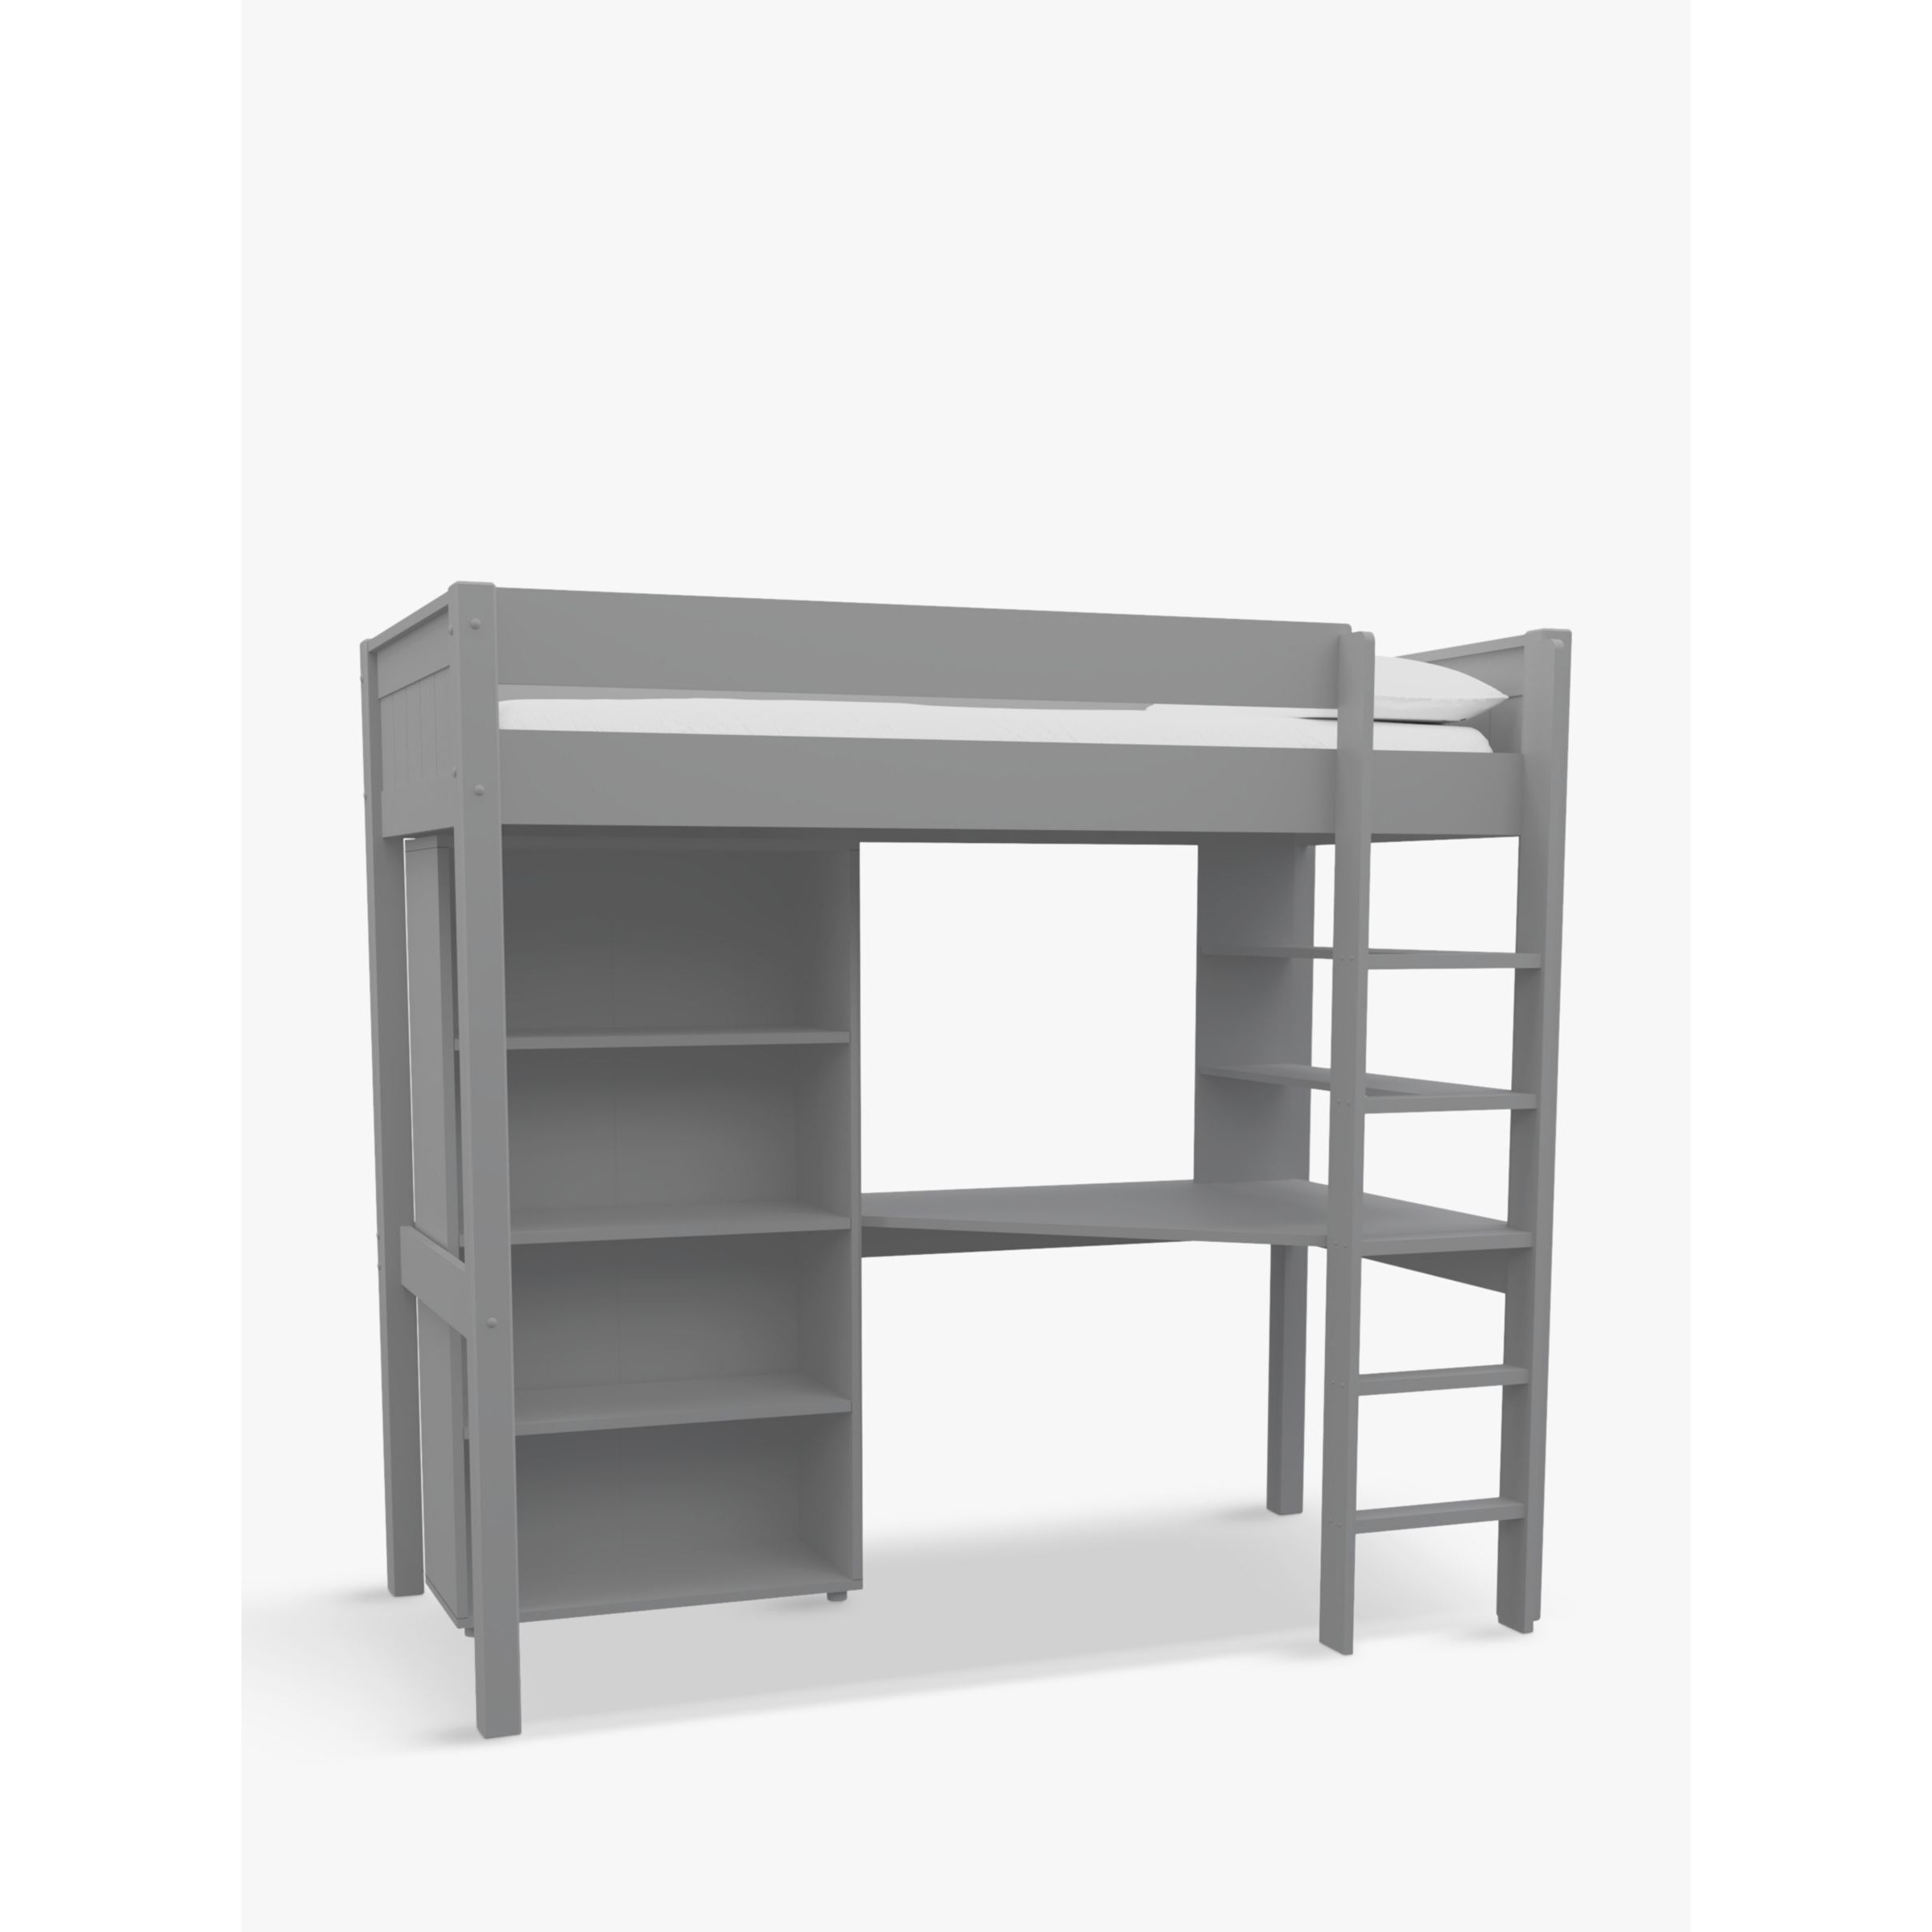 Stompa Classic Highsleeper Frame with Integrated Desk, Shelving and Bookcase, Single - image 1